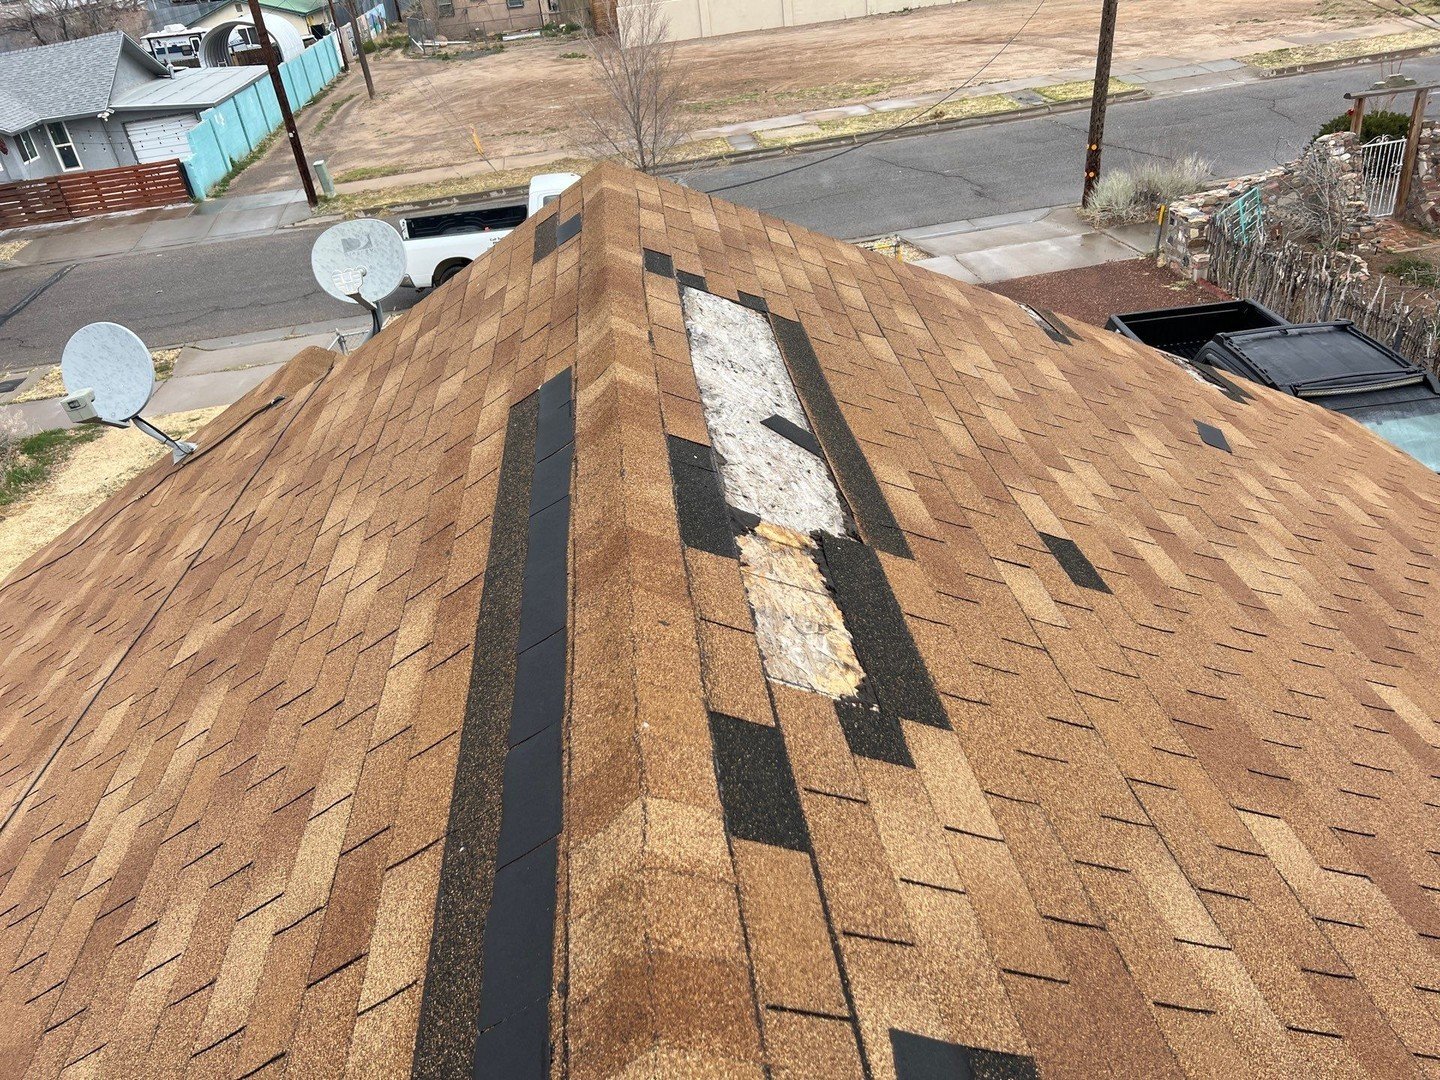 Feeling your shingles a bit light this spring? 🍃 Let's shore up your roofing and ensure your home stays protected. With Rhino Roofing, your peace of mind is our priority. Contact us today! 🏠🔐 

505-242-1602 #SecureRoofing #HomeProtection #RhinoRoo